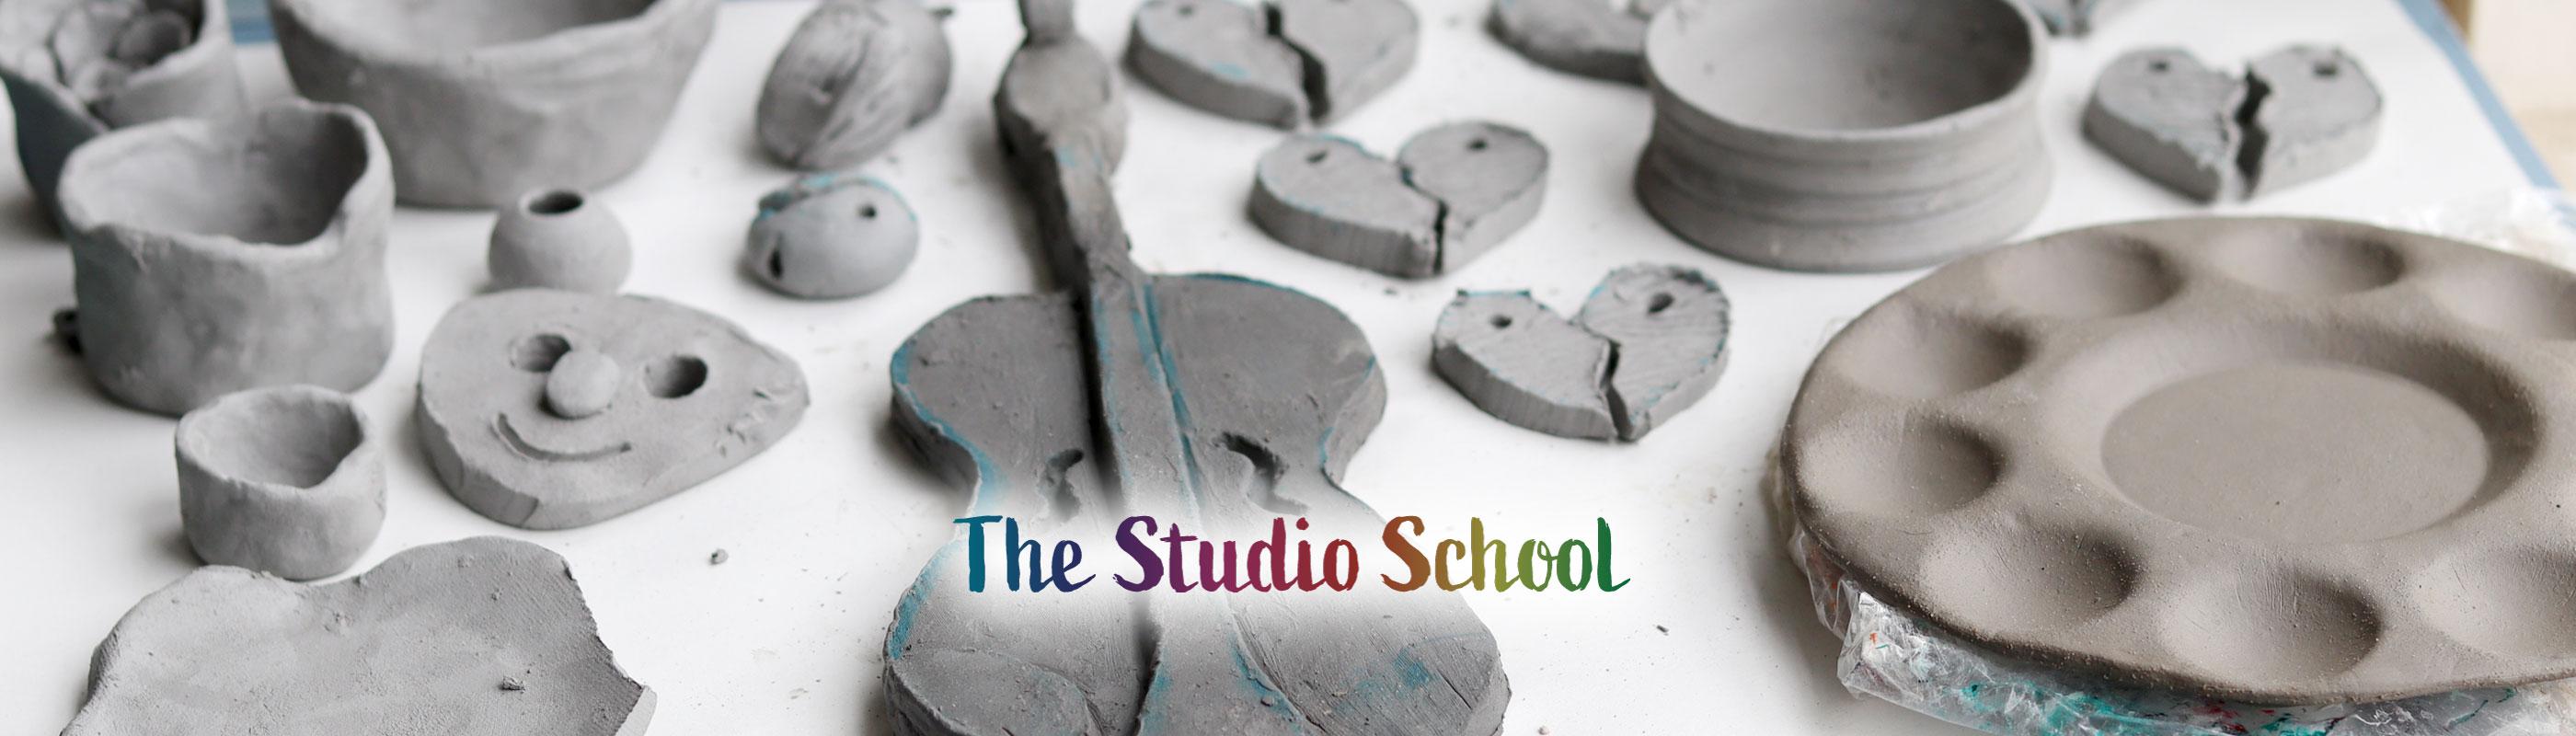 The Studio School - Clay sculptures drying on a table